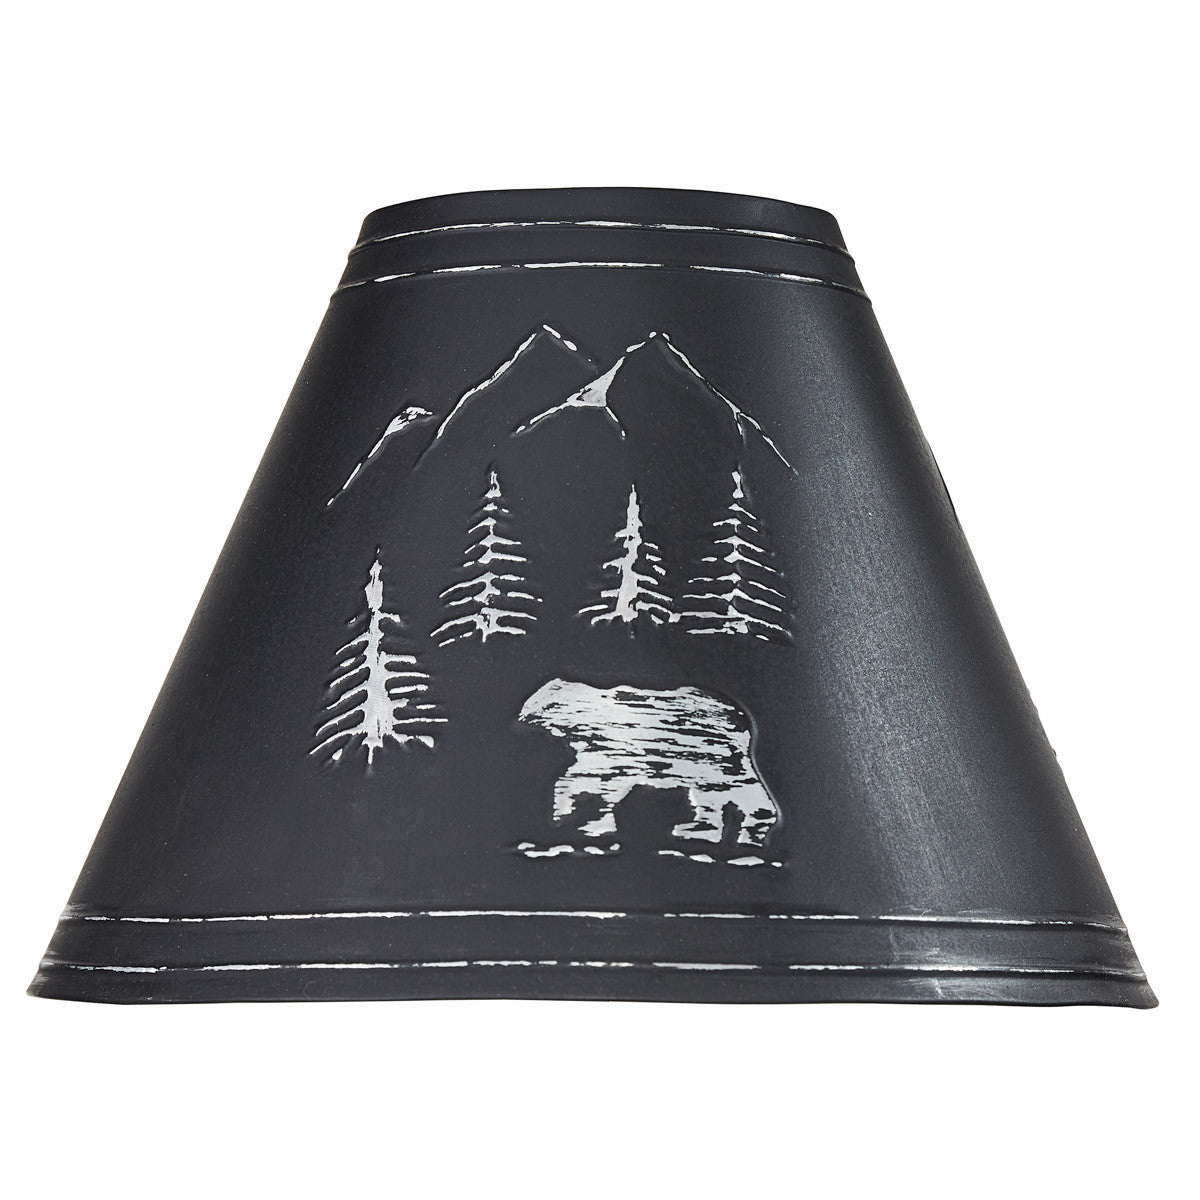 Black Bear Rustic Cabin Decor Hand Painted Lamp With Shade